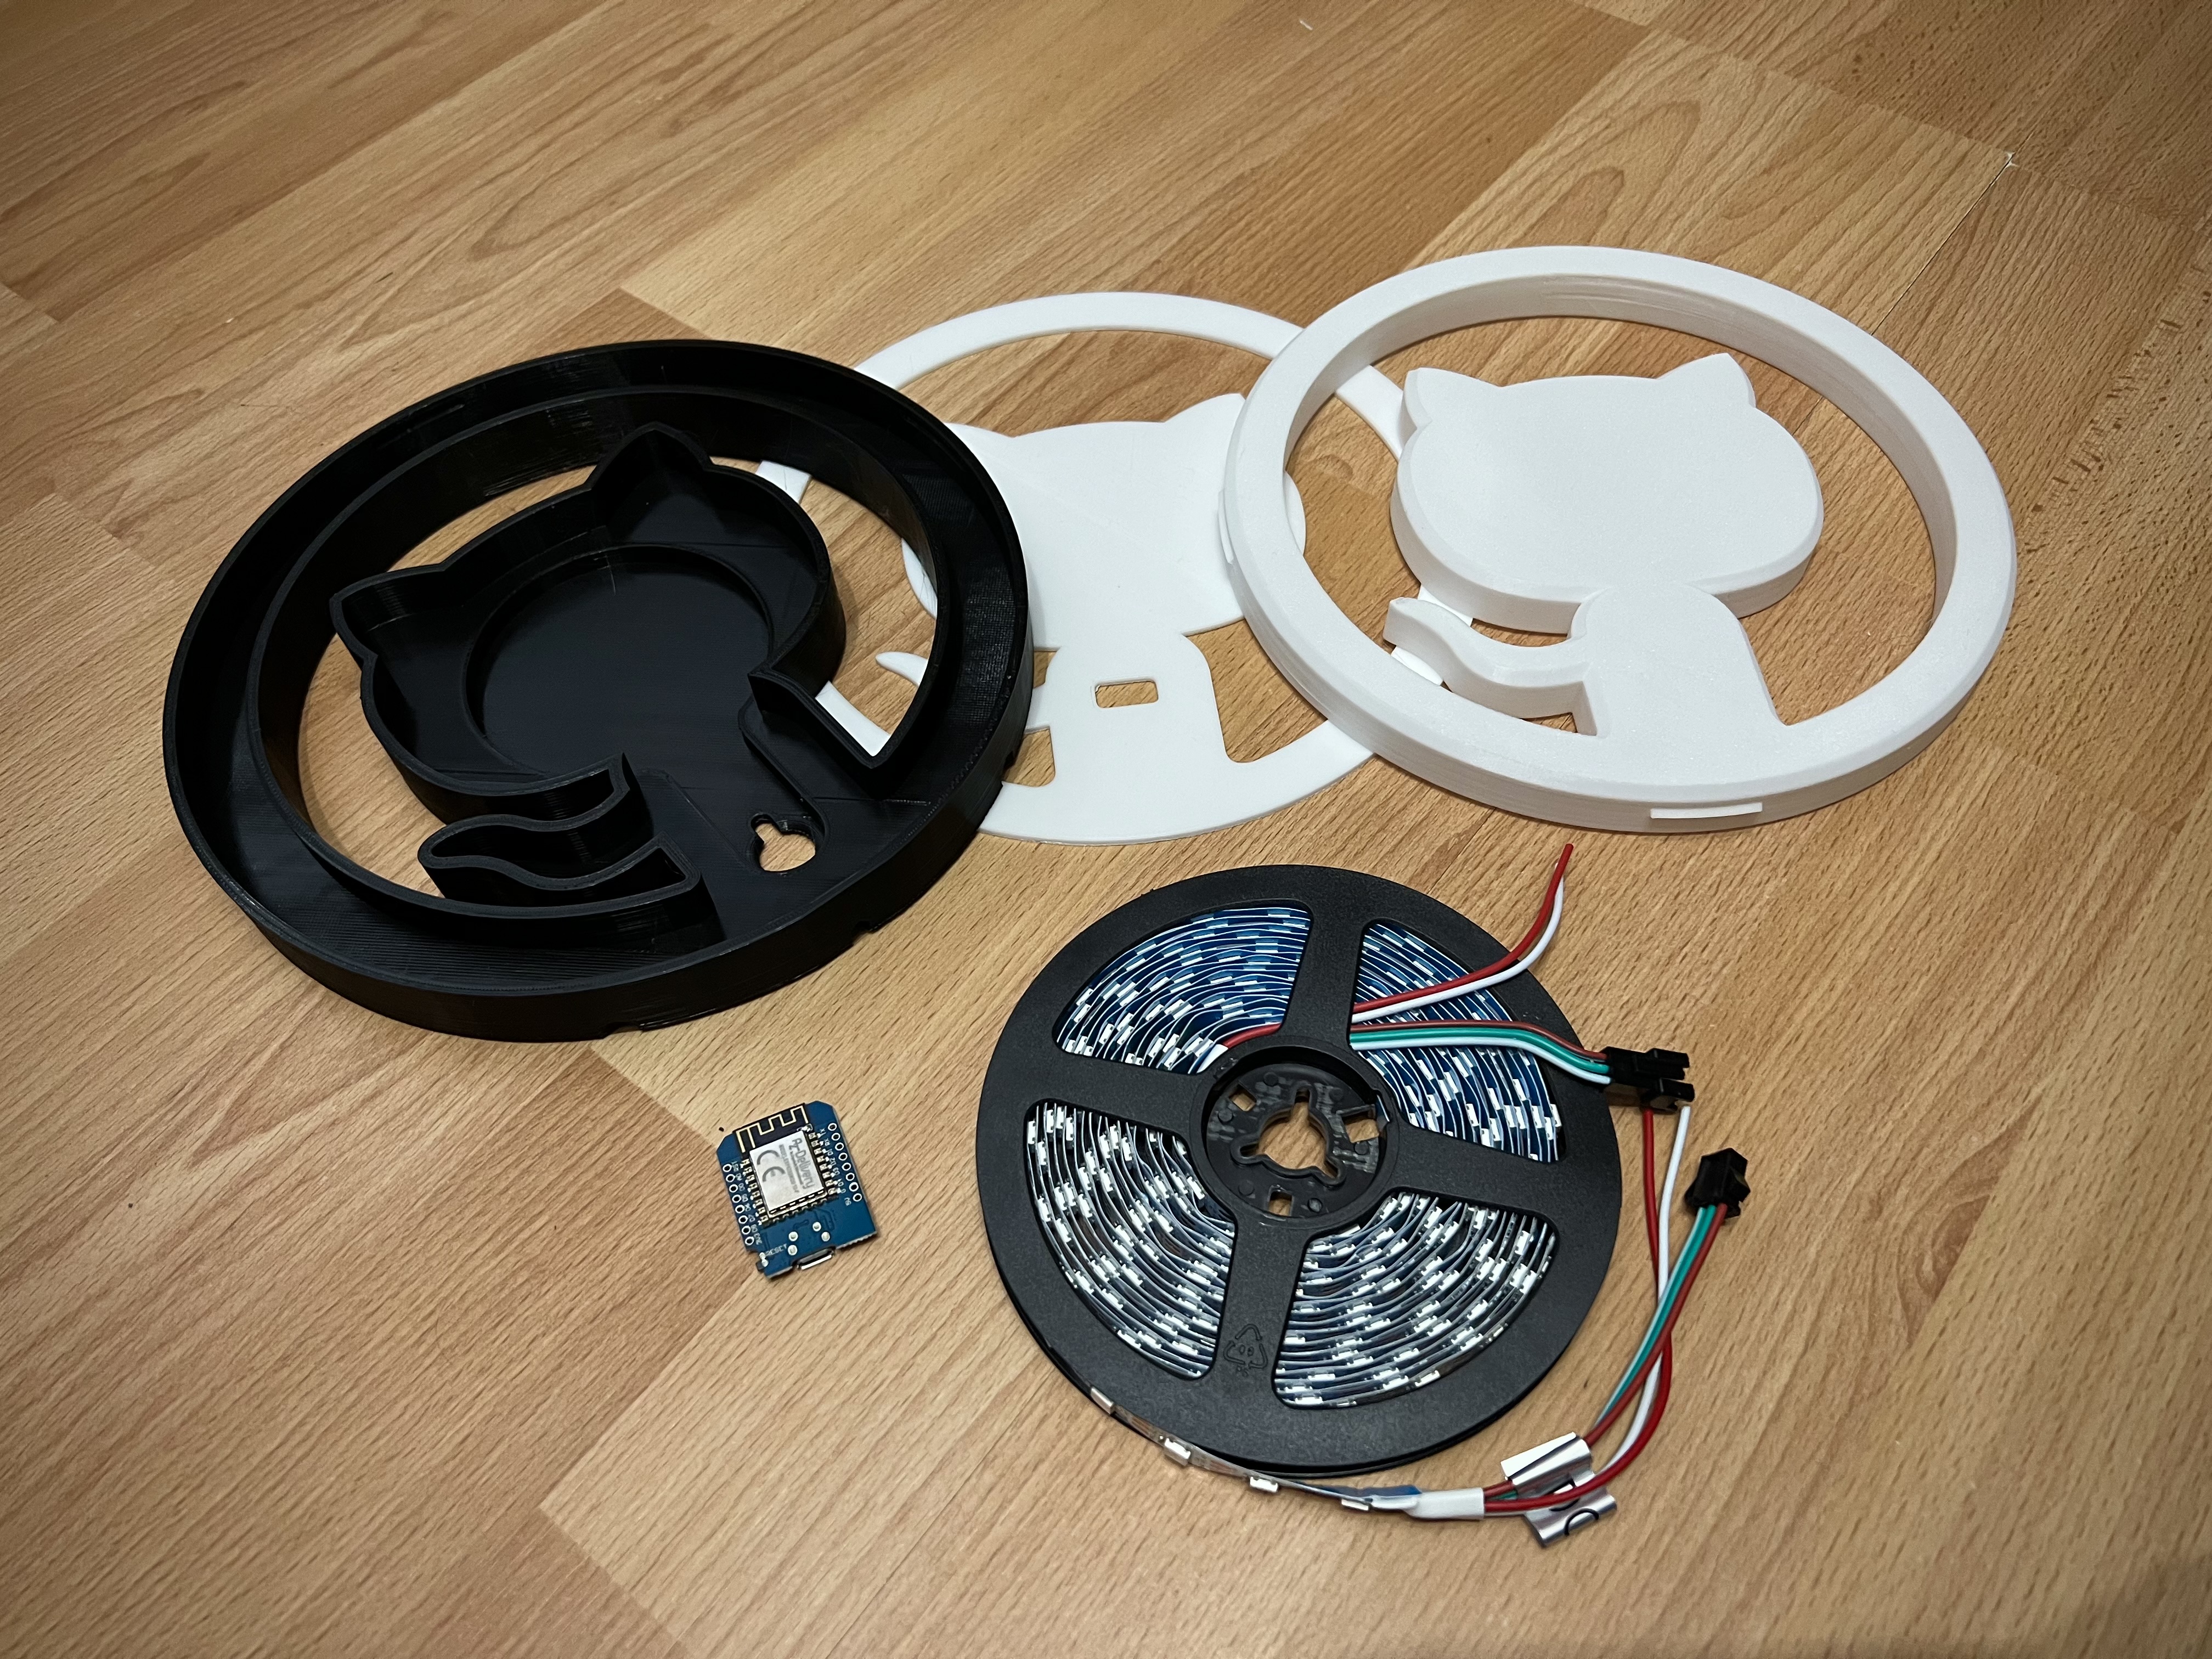 Component parts for the Octolamp build